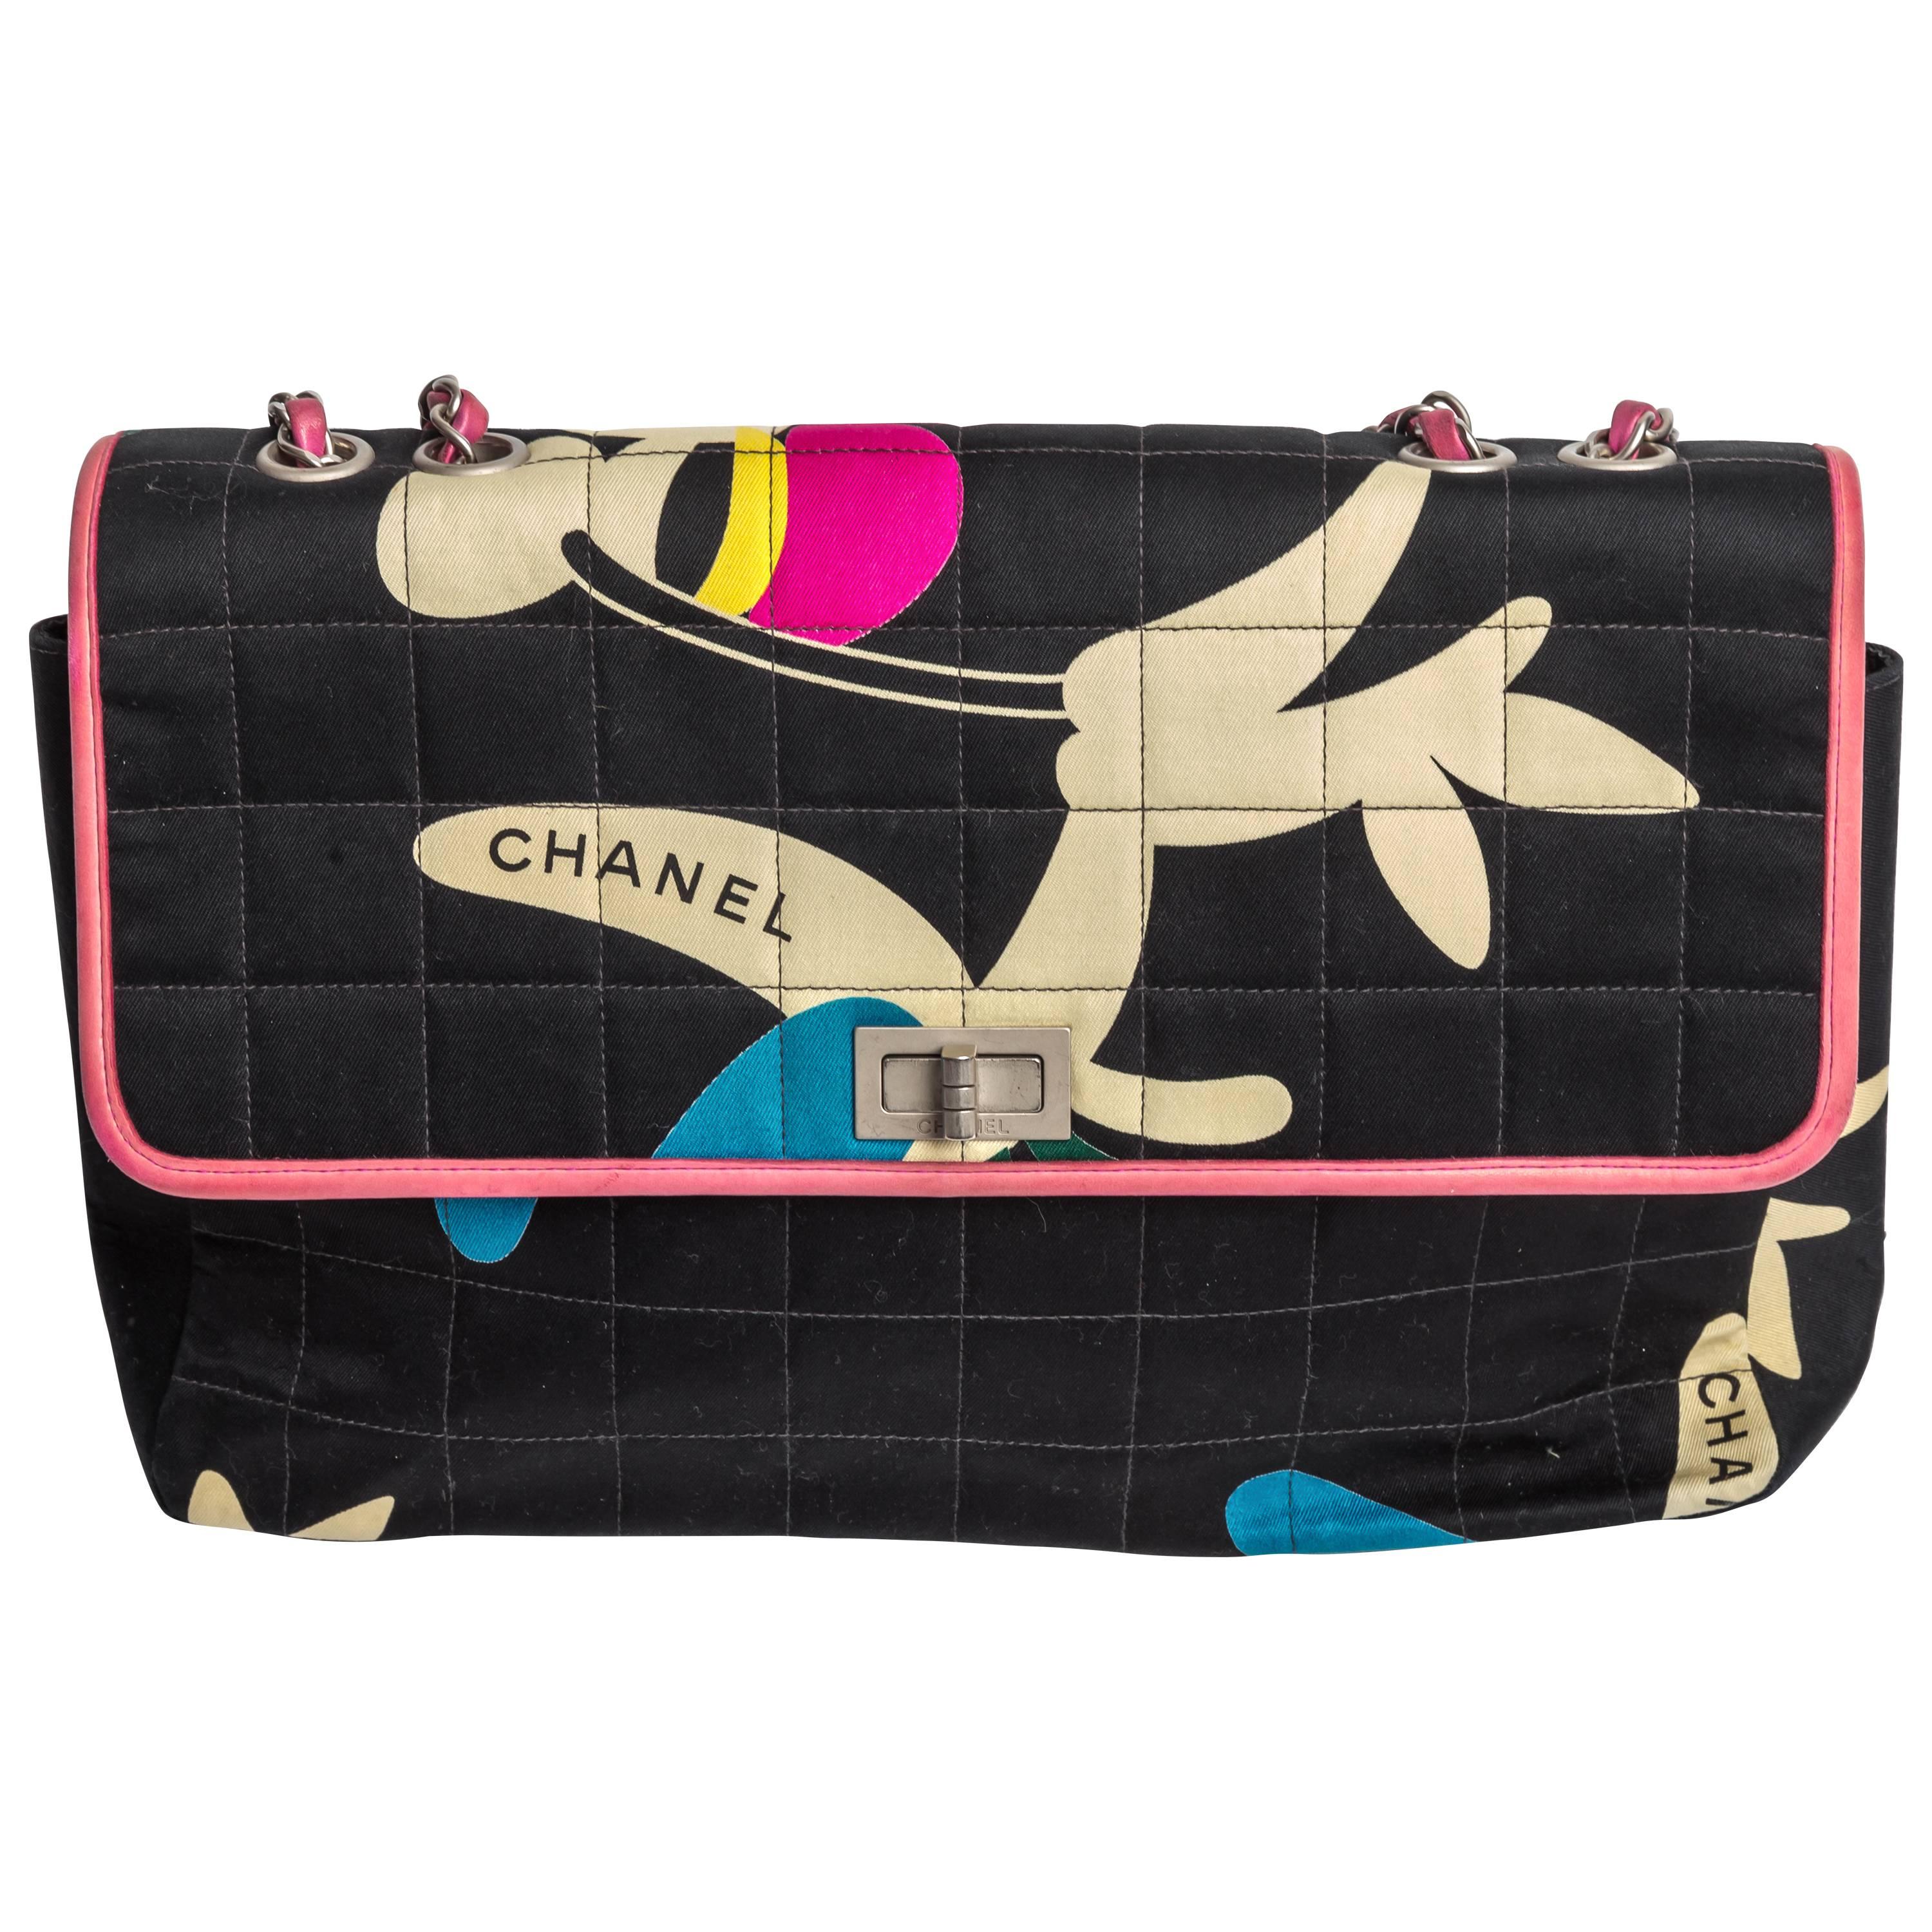 Chanel Multi Color Fabric Shoulder Bag with Silver Hardware